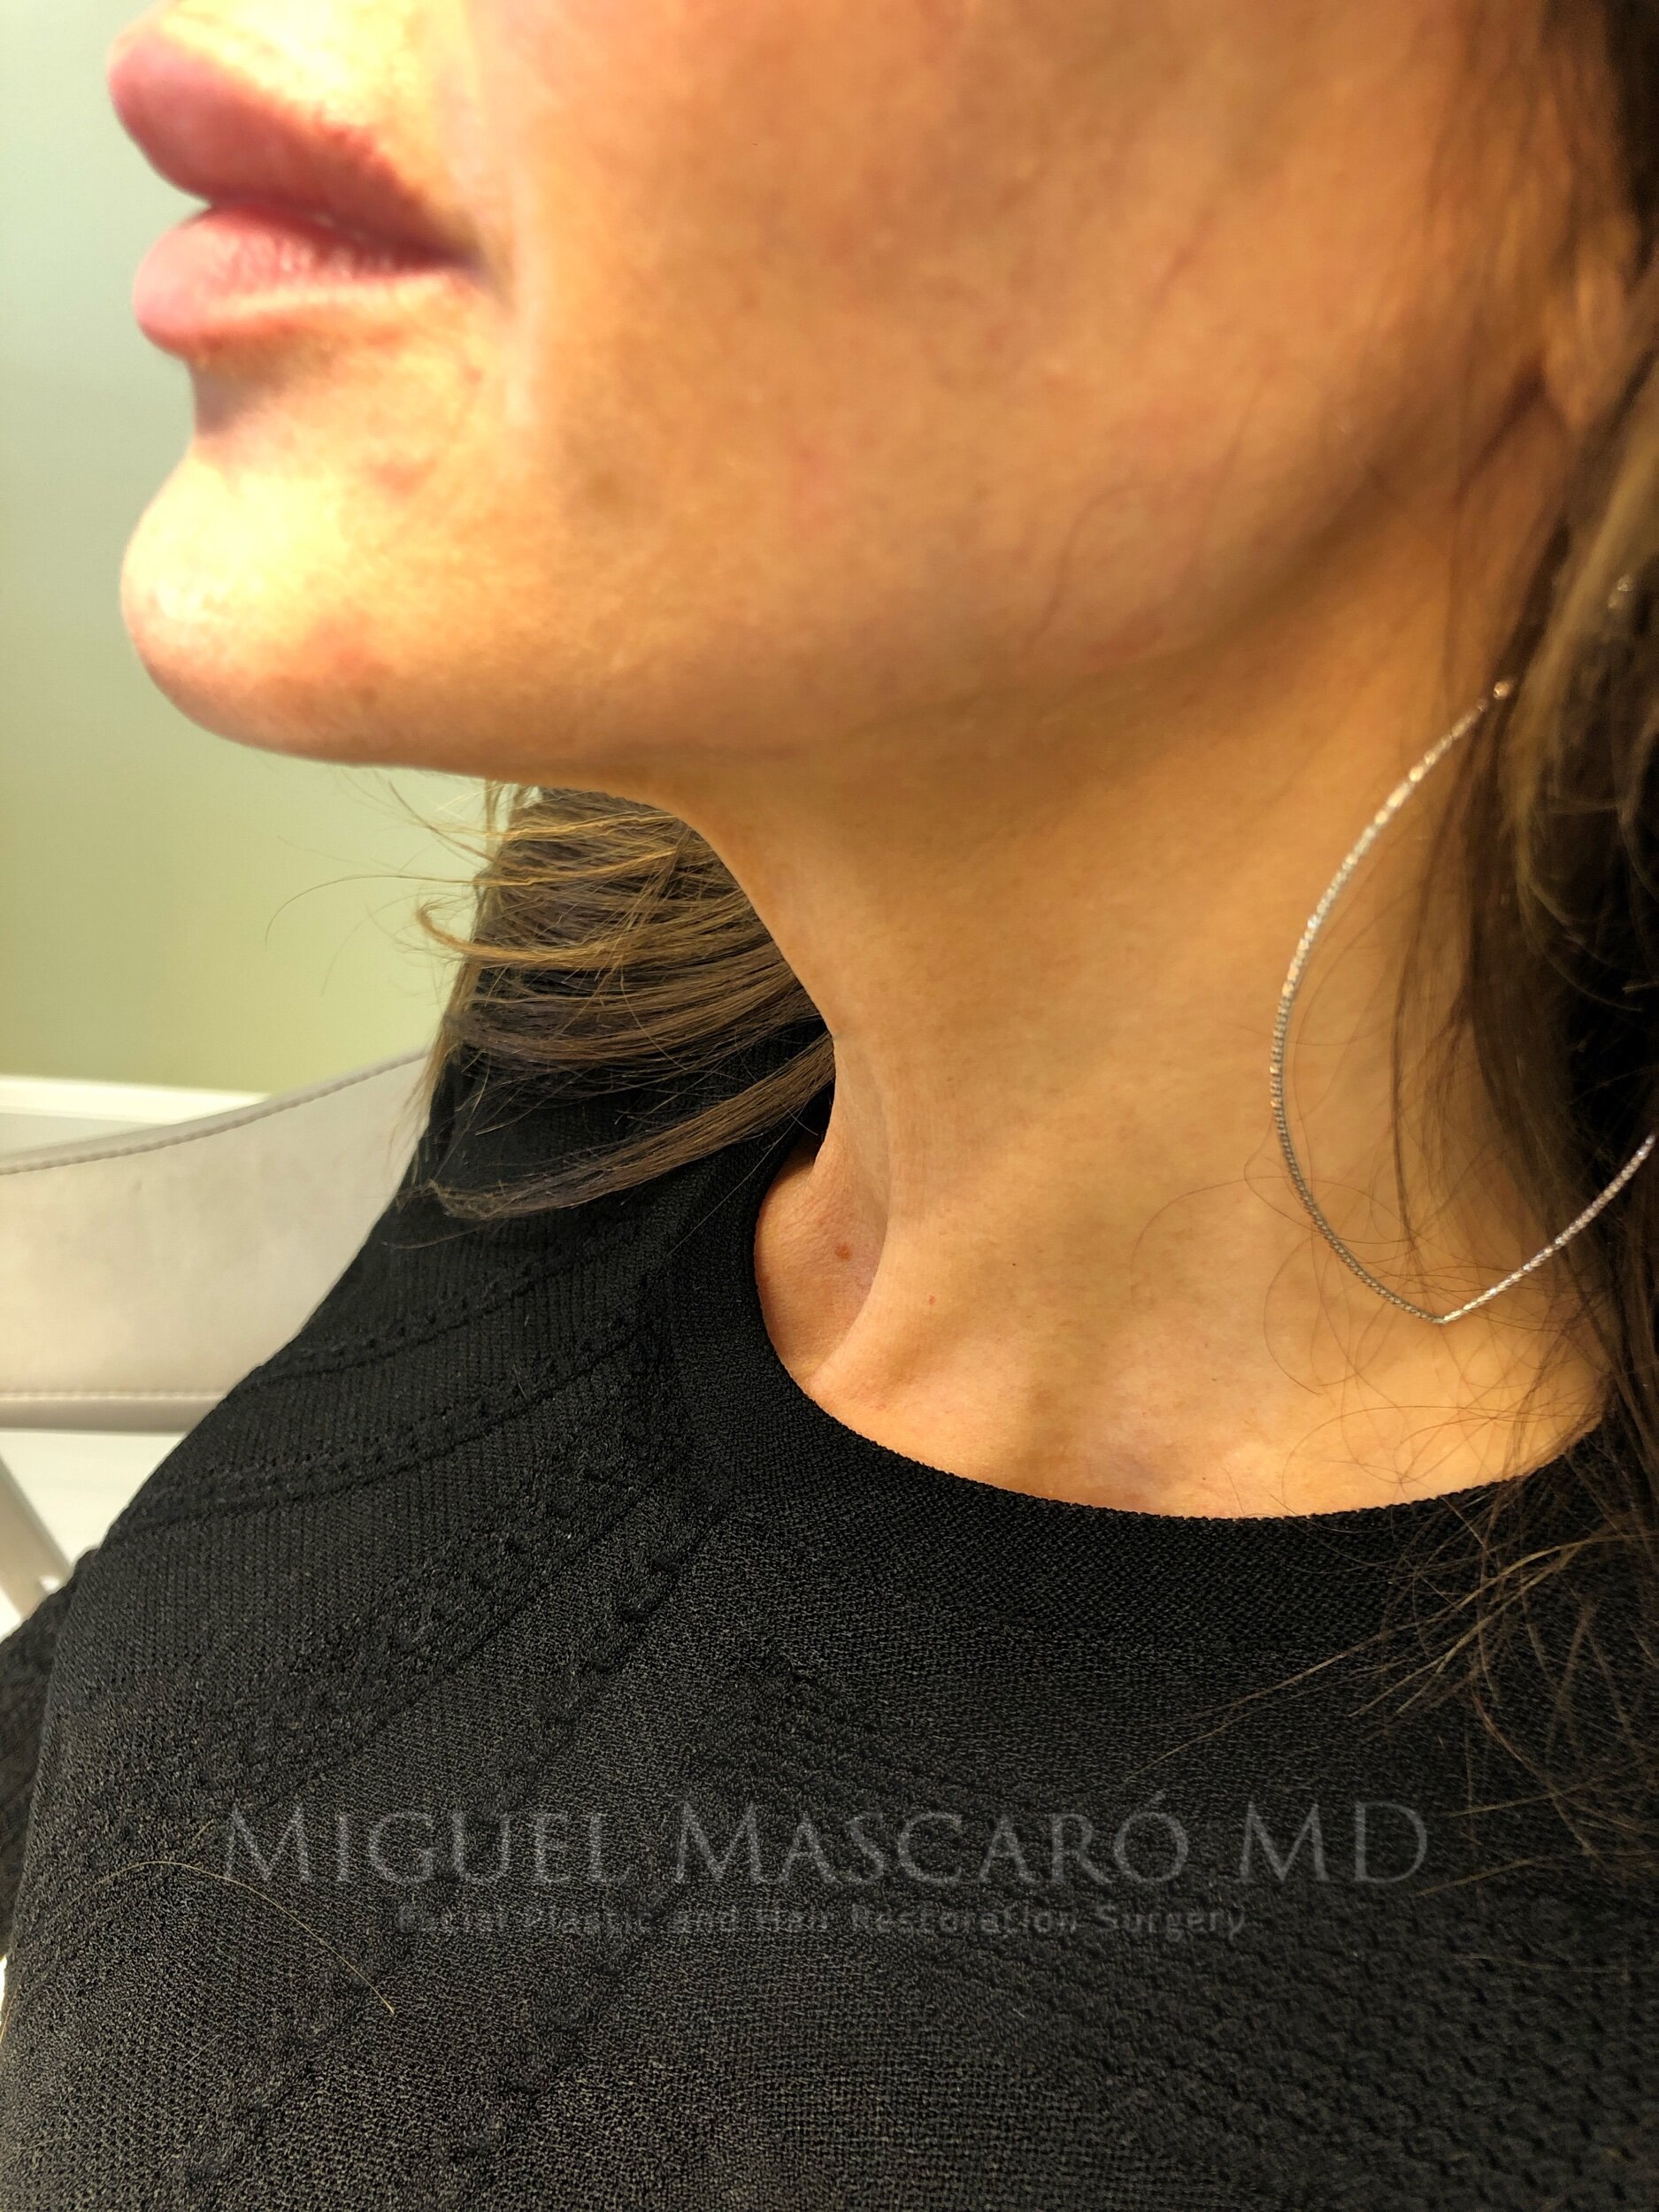  Submentoplasty - isolated surgical neck lift with no incision in front of the ears - 2 weeks out.   